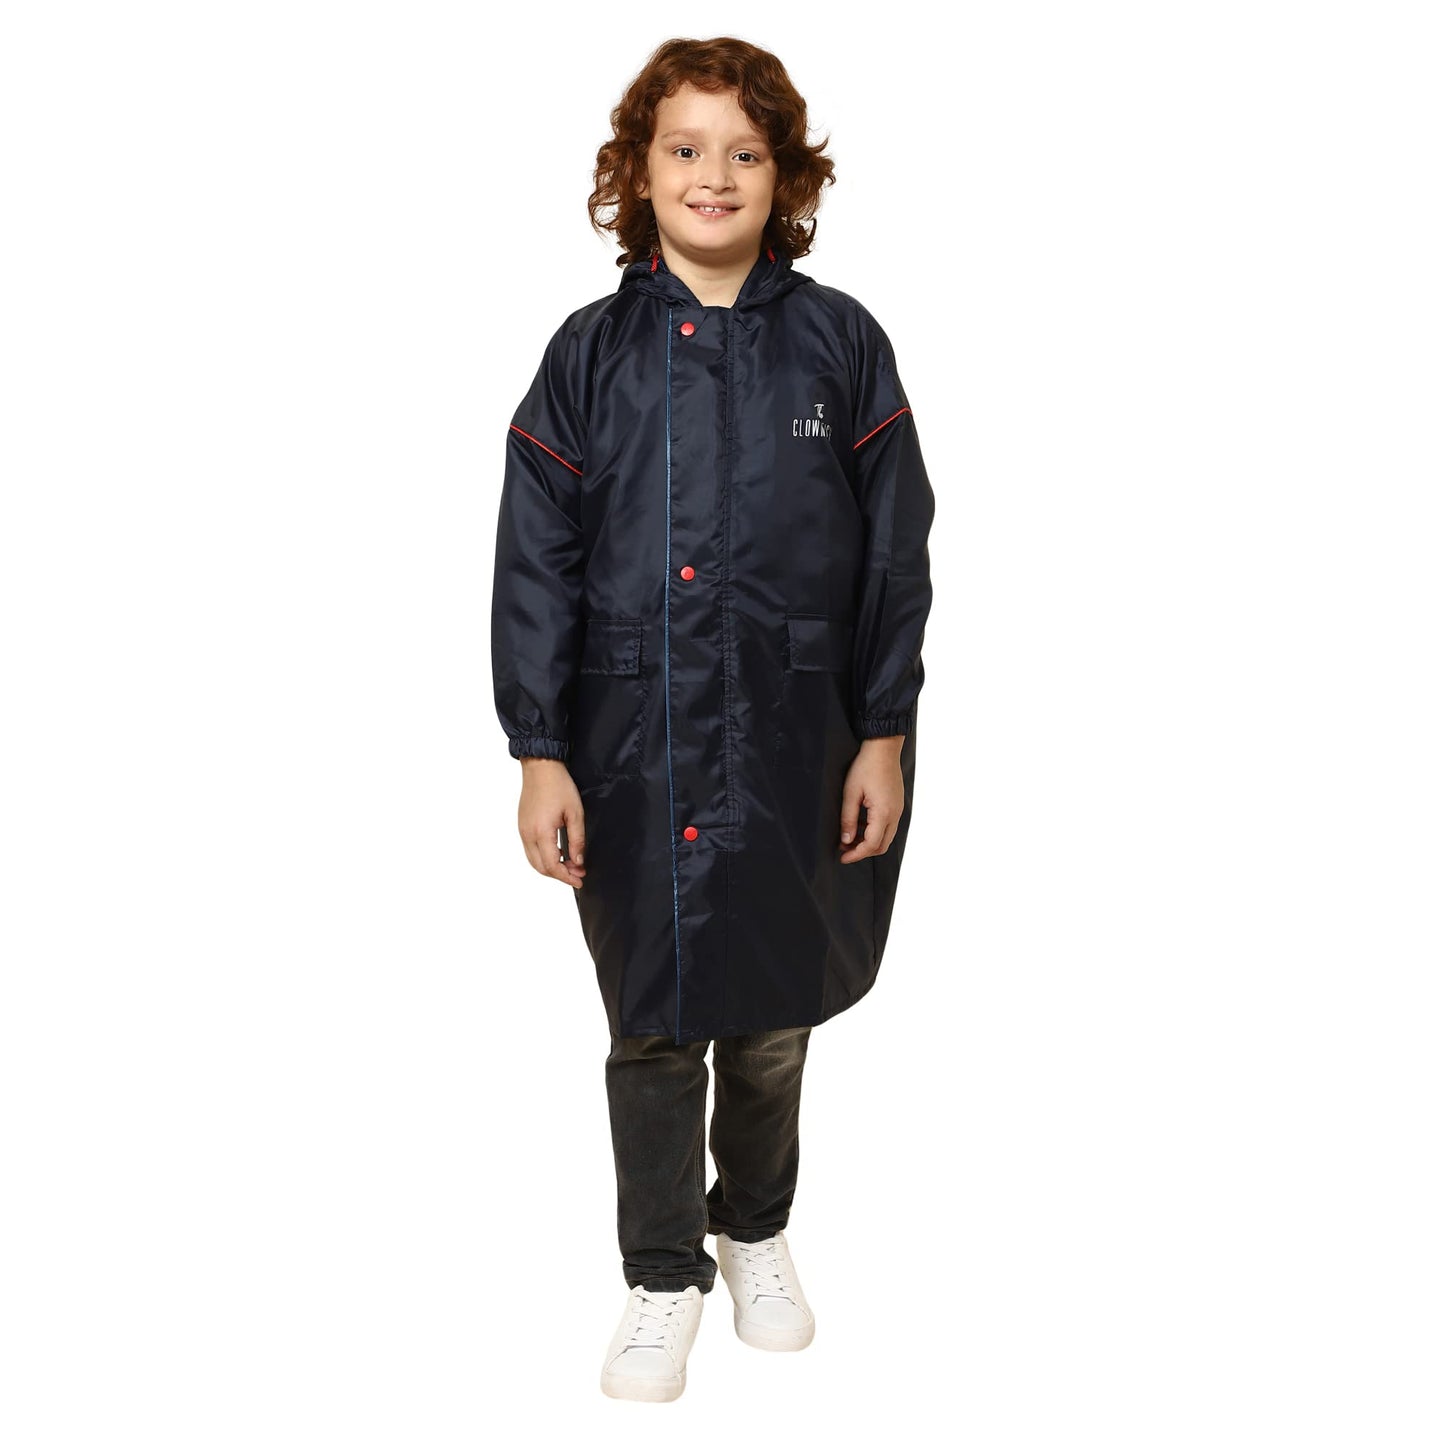 THE CLOWNFISH Oliver Series Kids Waterproof Polyester Double Coating Reversible Longcoat with Hood and Reflector Logo at Back. Printed Plastic Pouch. Kid Age-9-10 years (Blue)